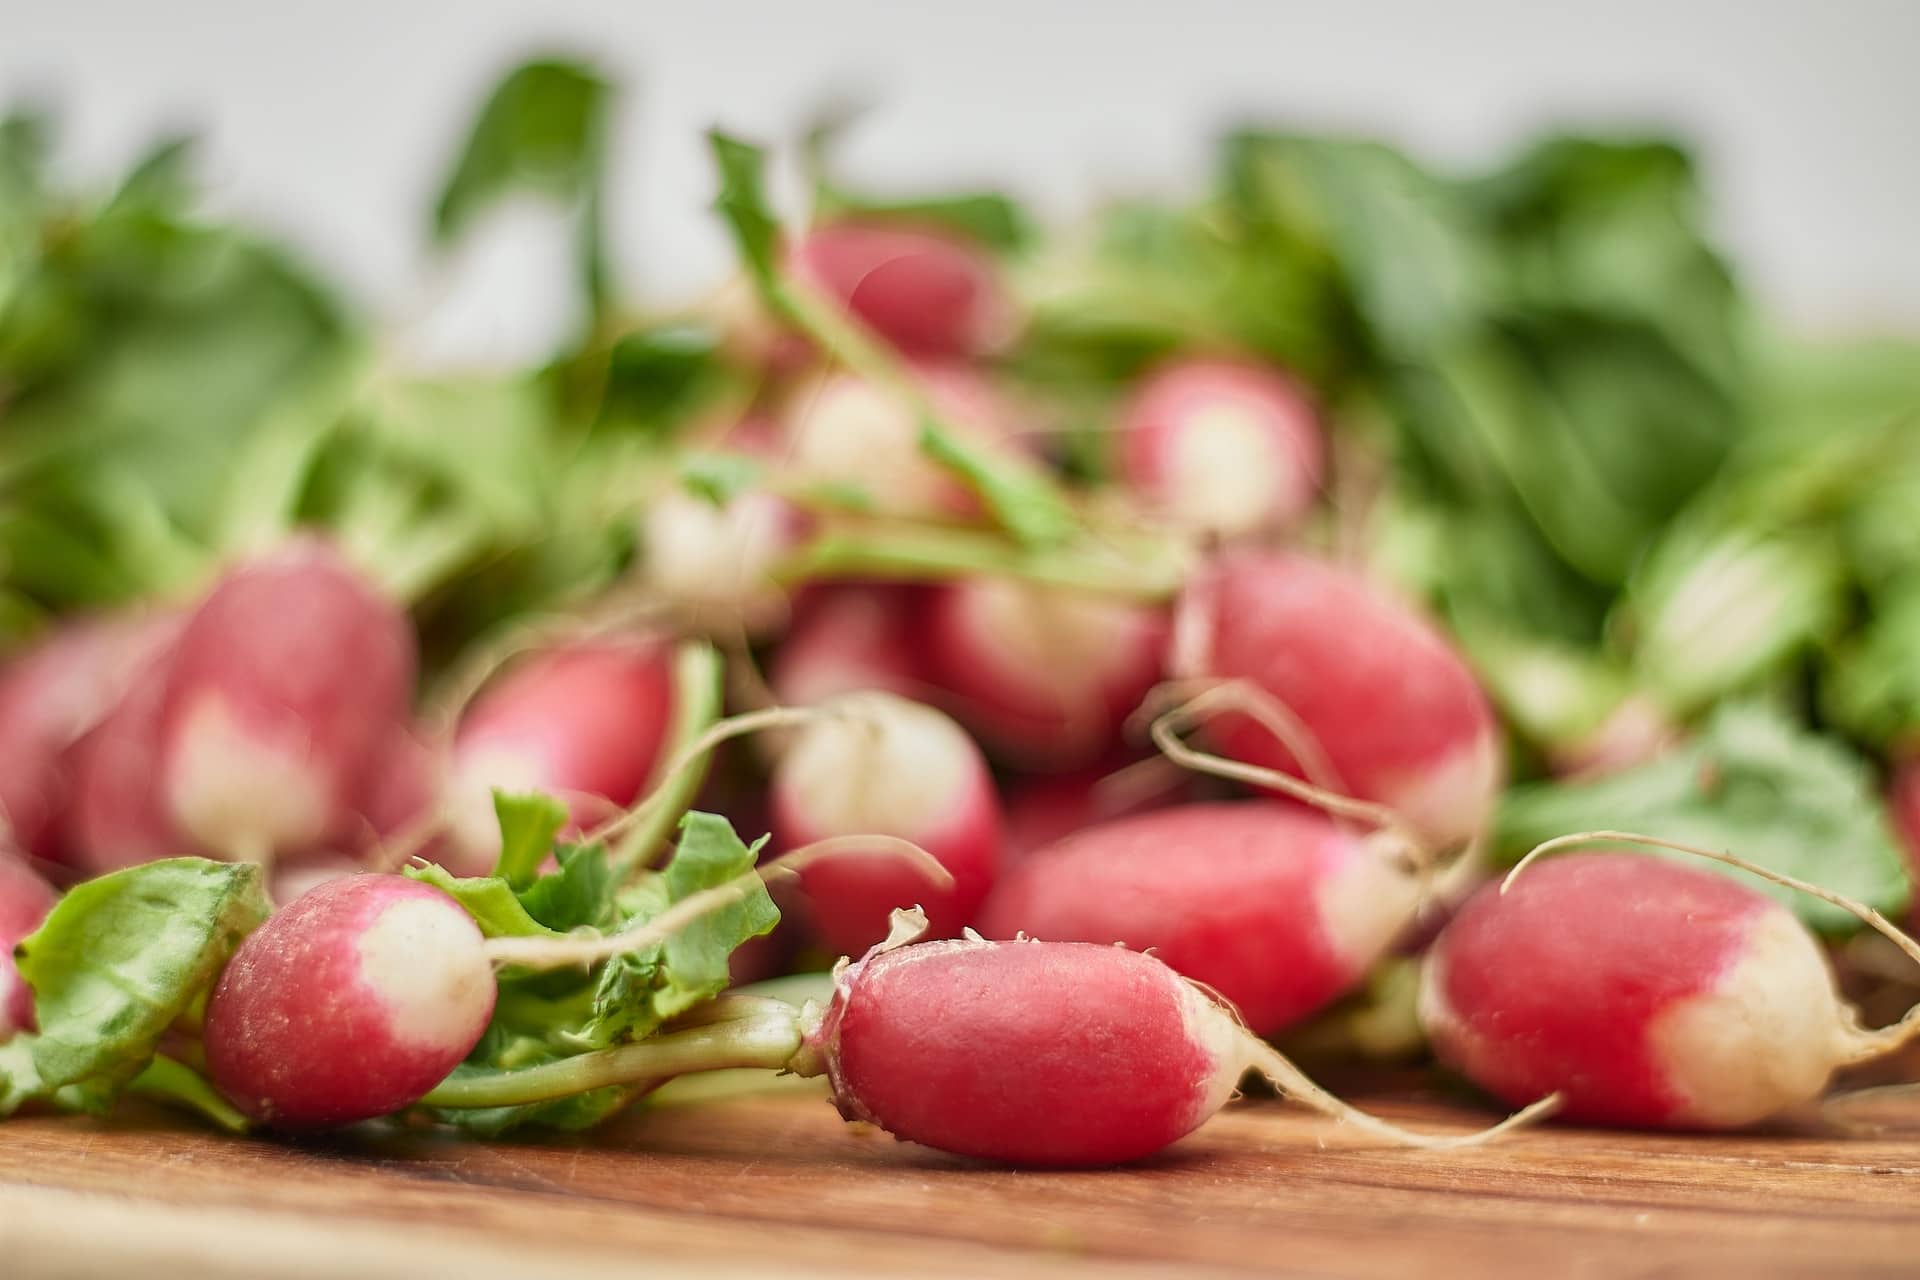 When to Harvest Radishes